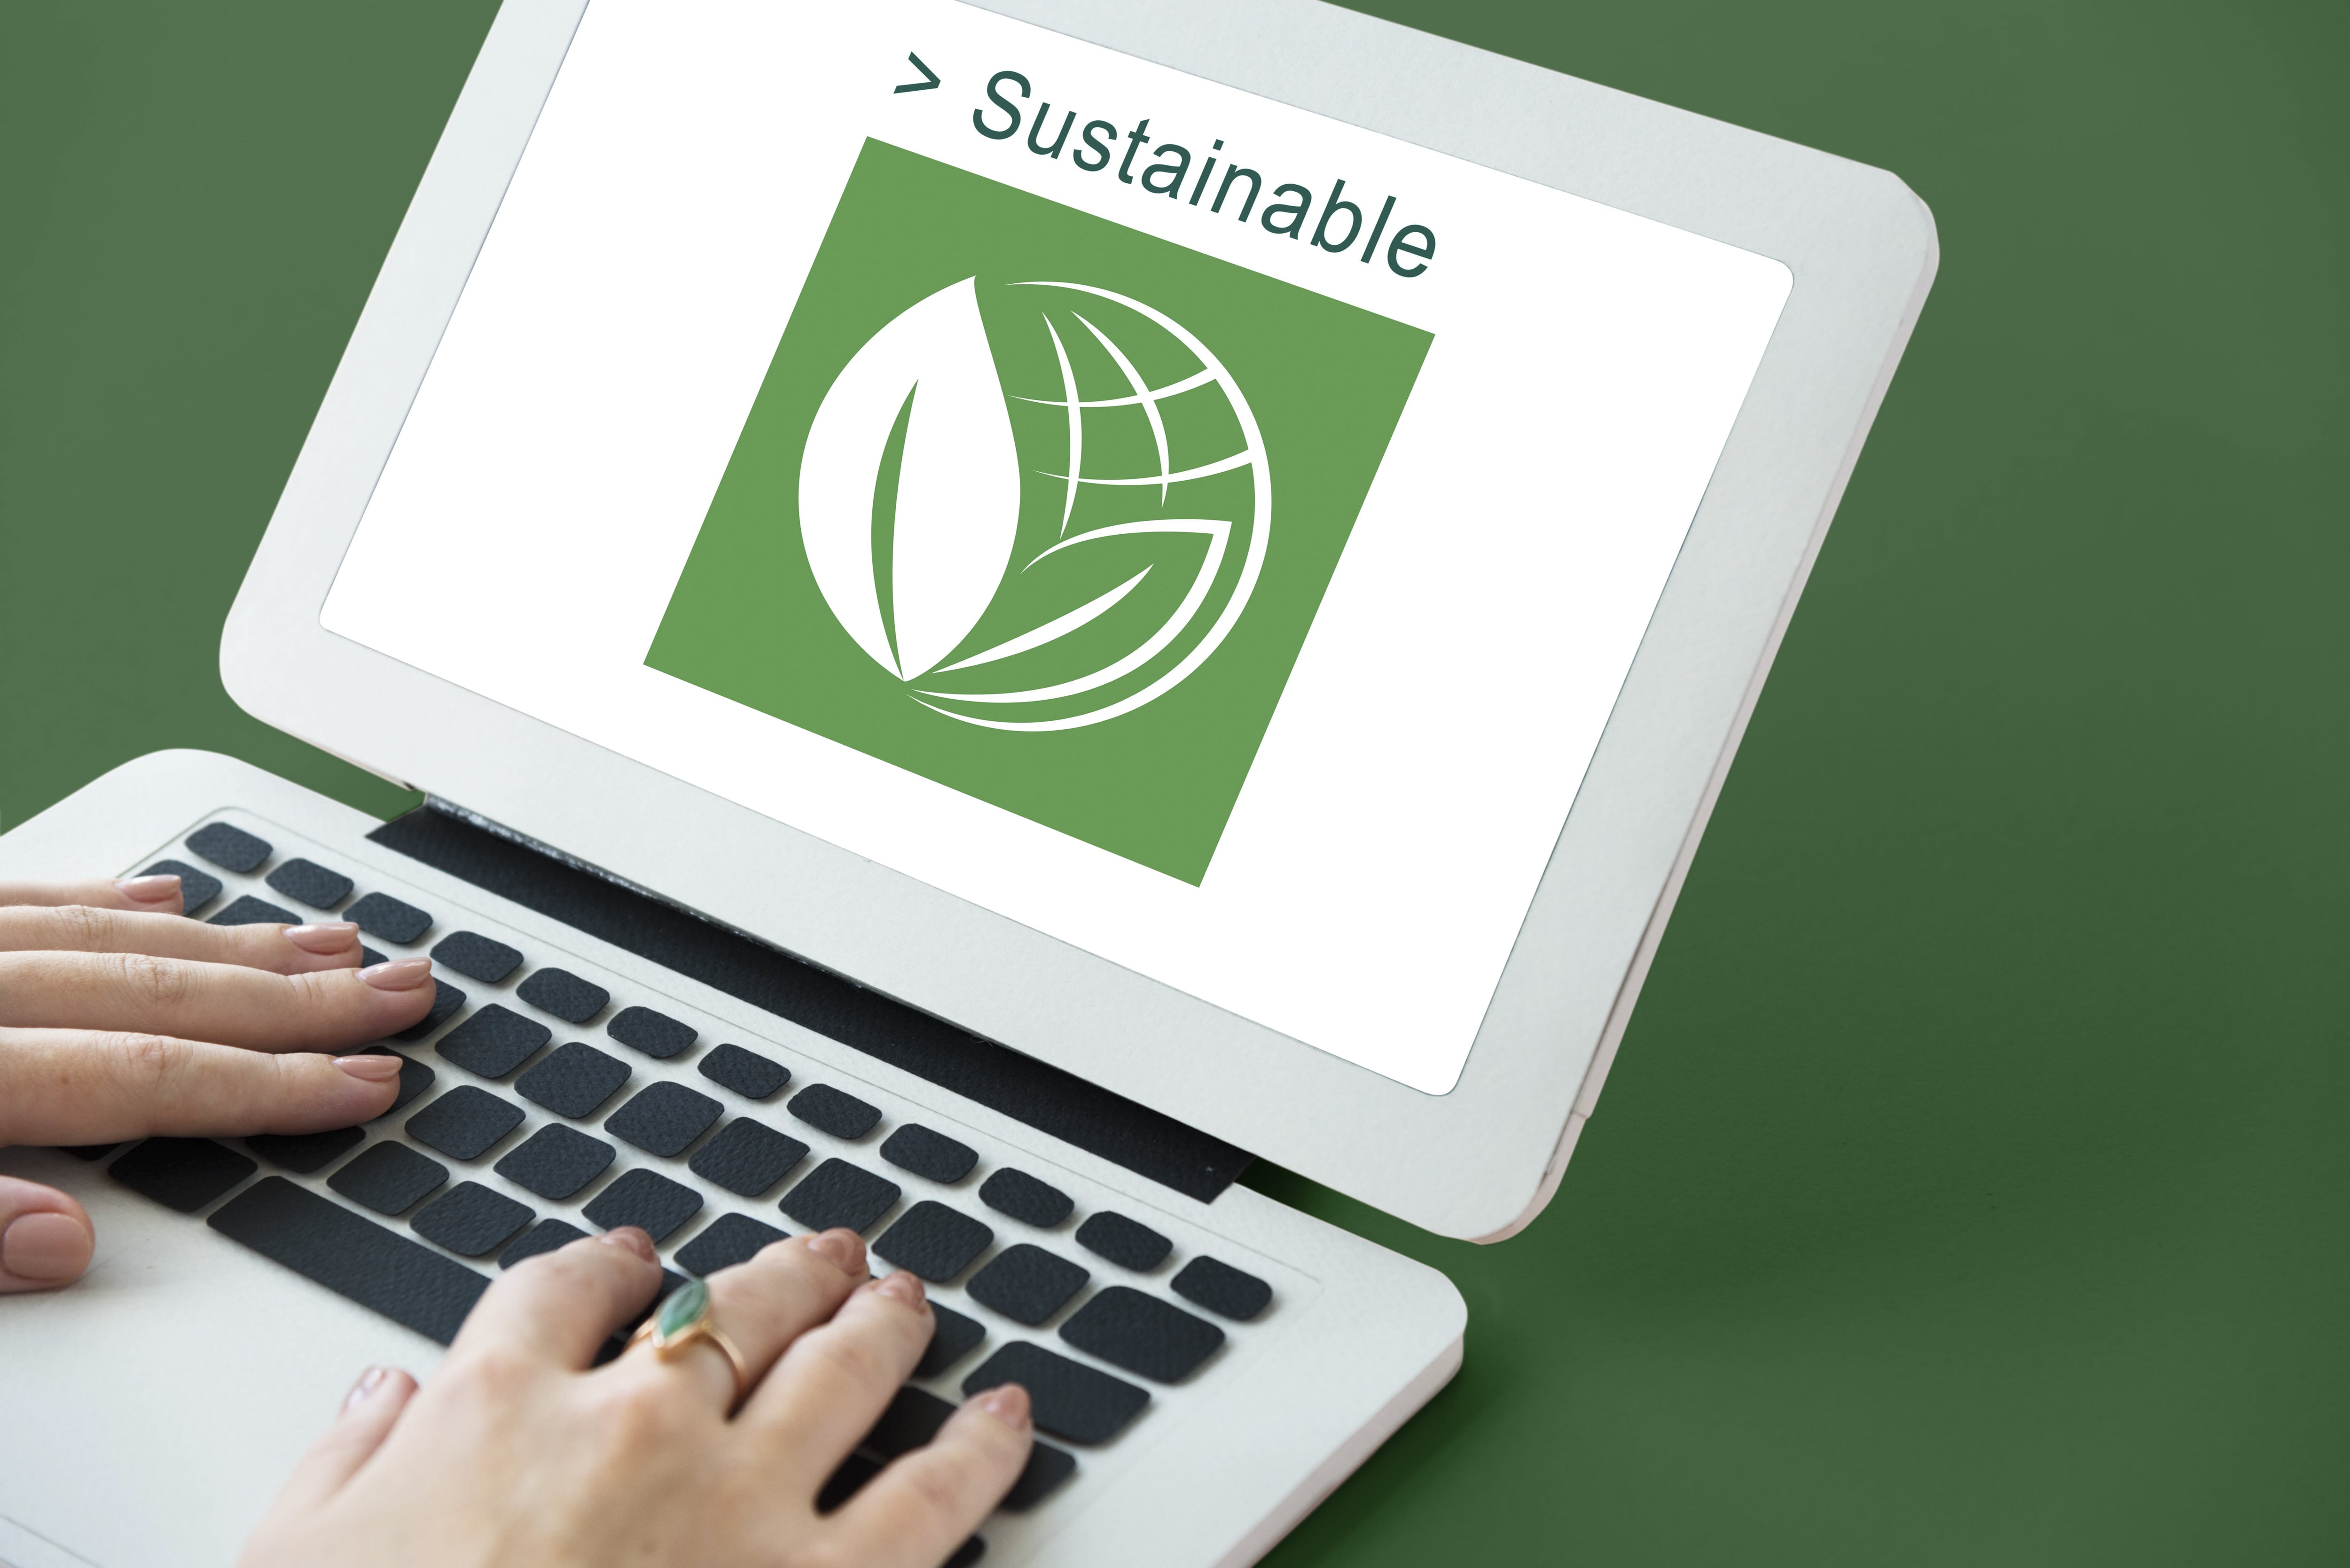 Spanish Point Technologies: Improving Sustainability Through Carbon Footprint Awareness